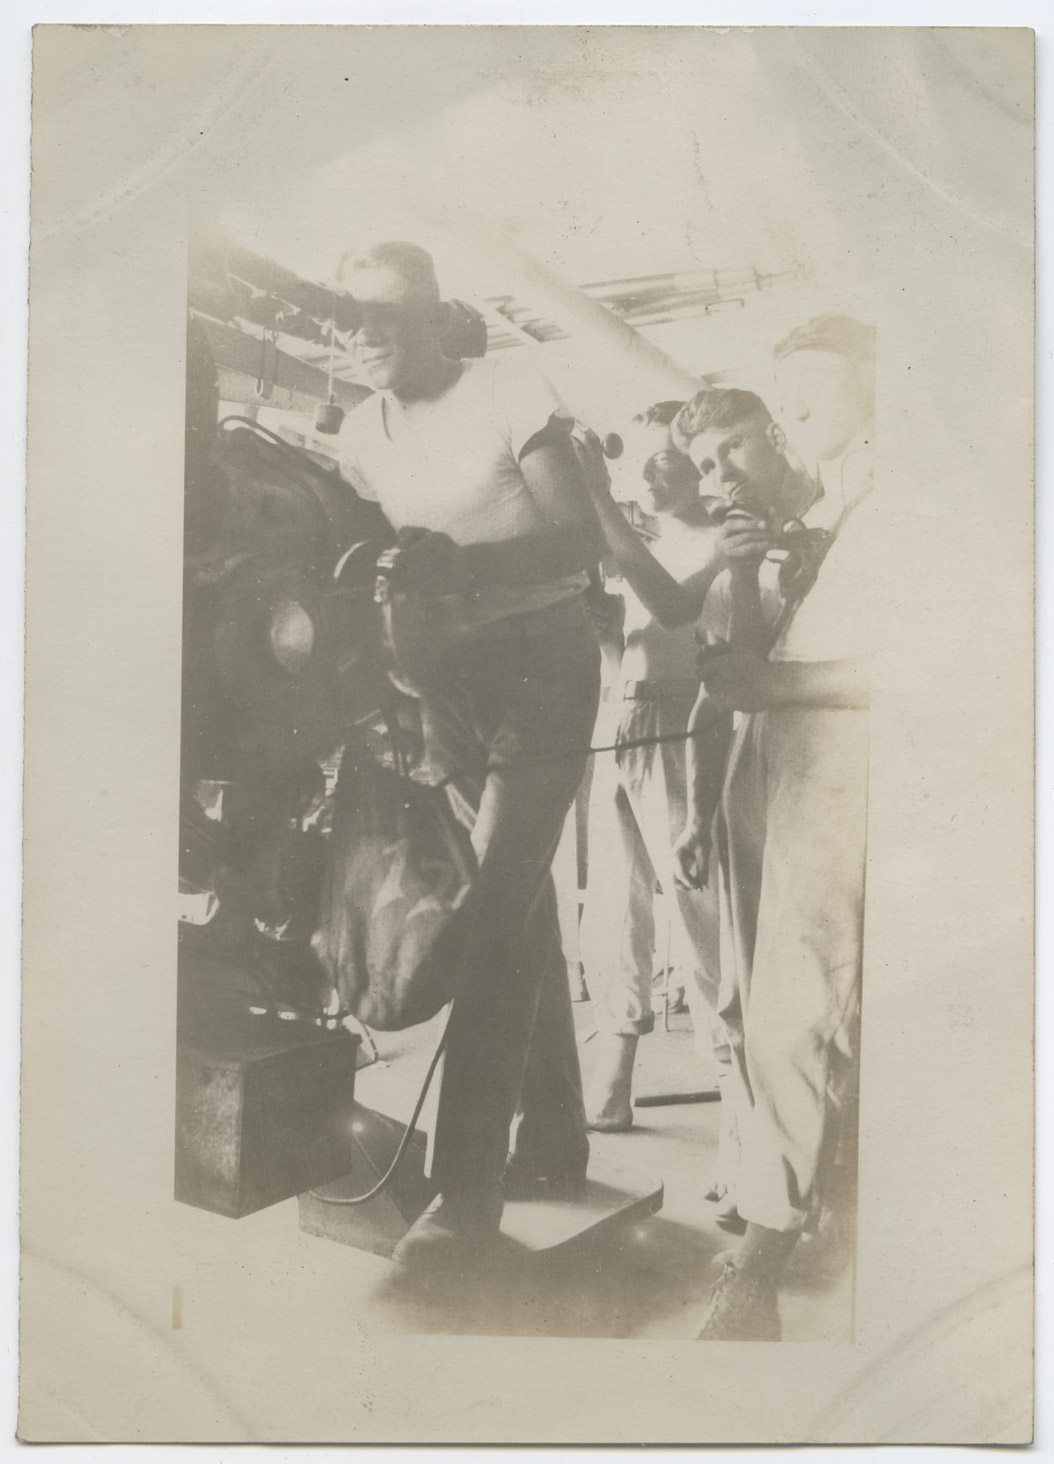 One man checks the sights on the guns while the man behind him reports to other members of the gunnery crew through a communications tube.